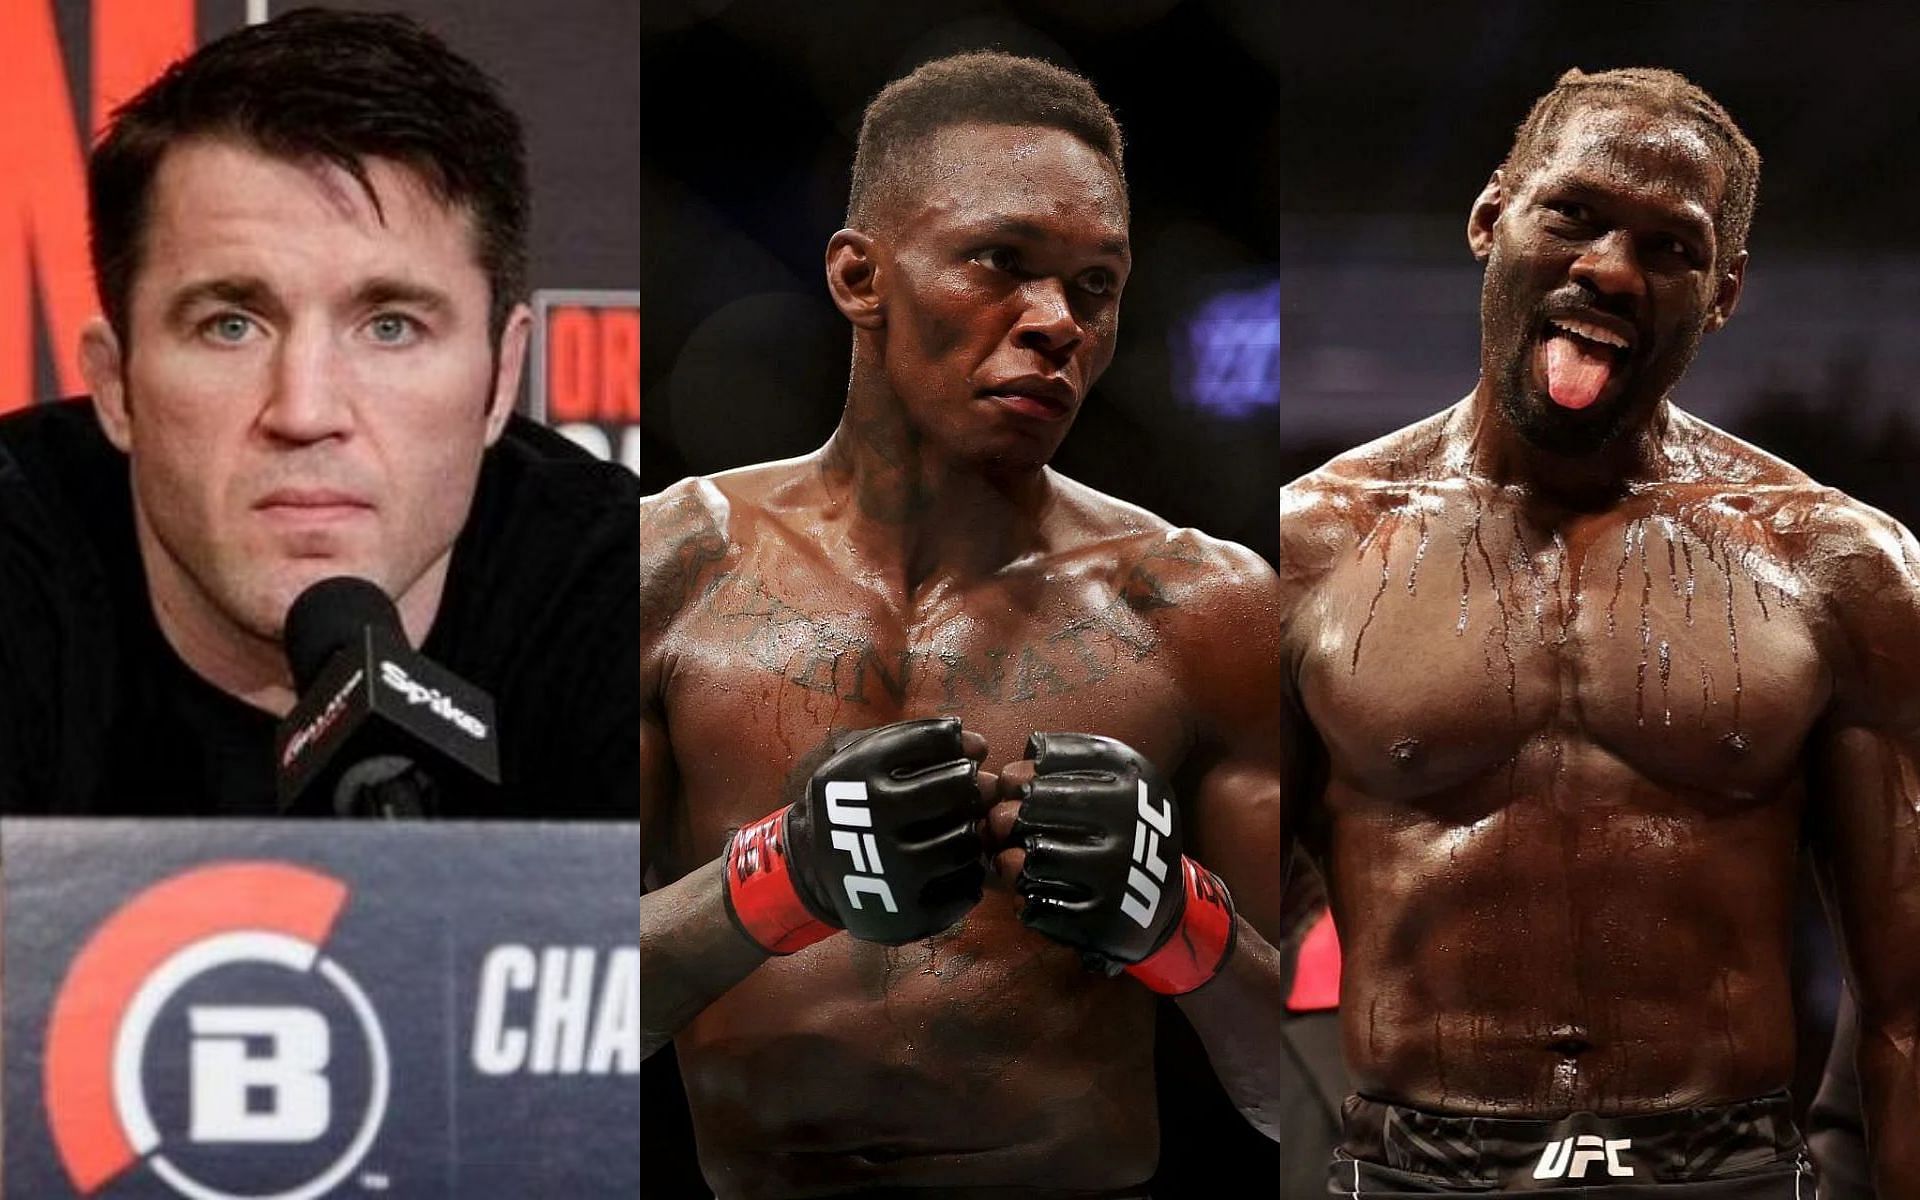 Chael Sonnen, Israel Adesanya, and Jared Cannonier (left to right)